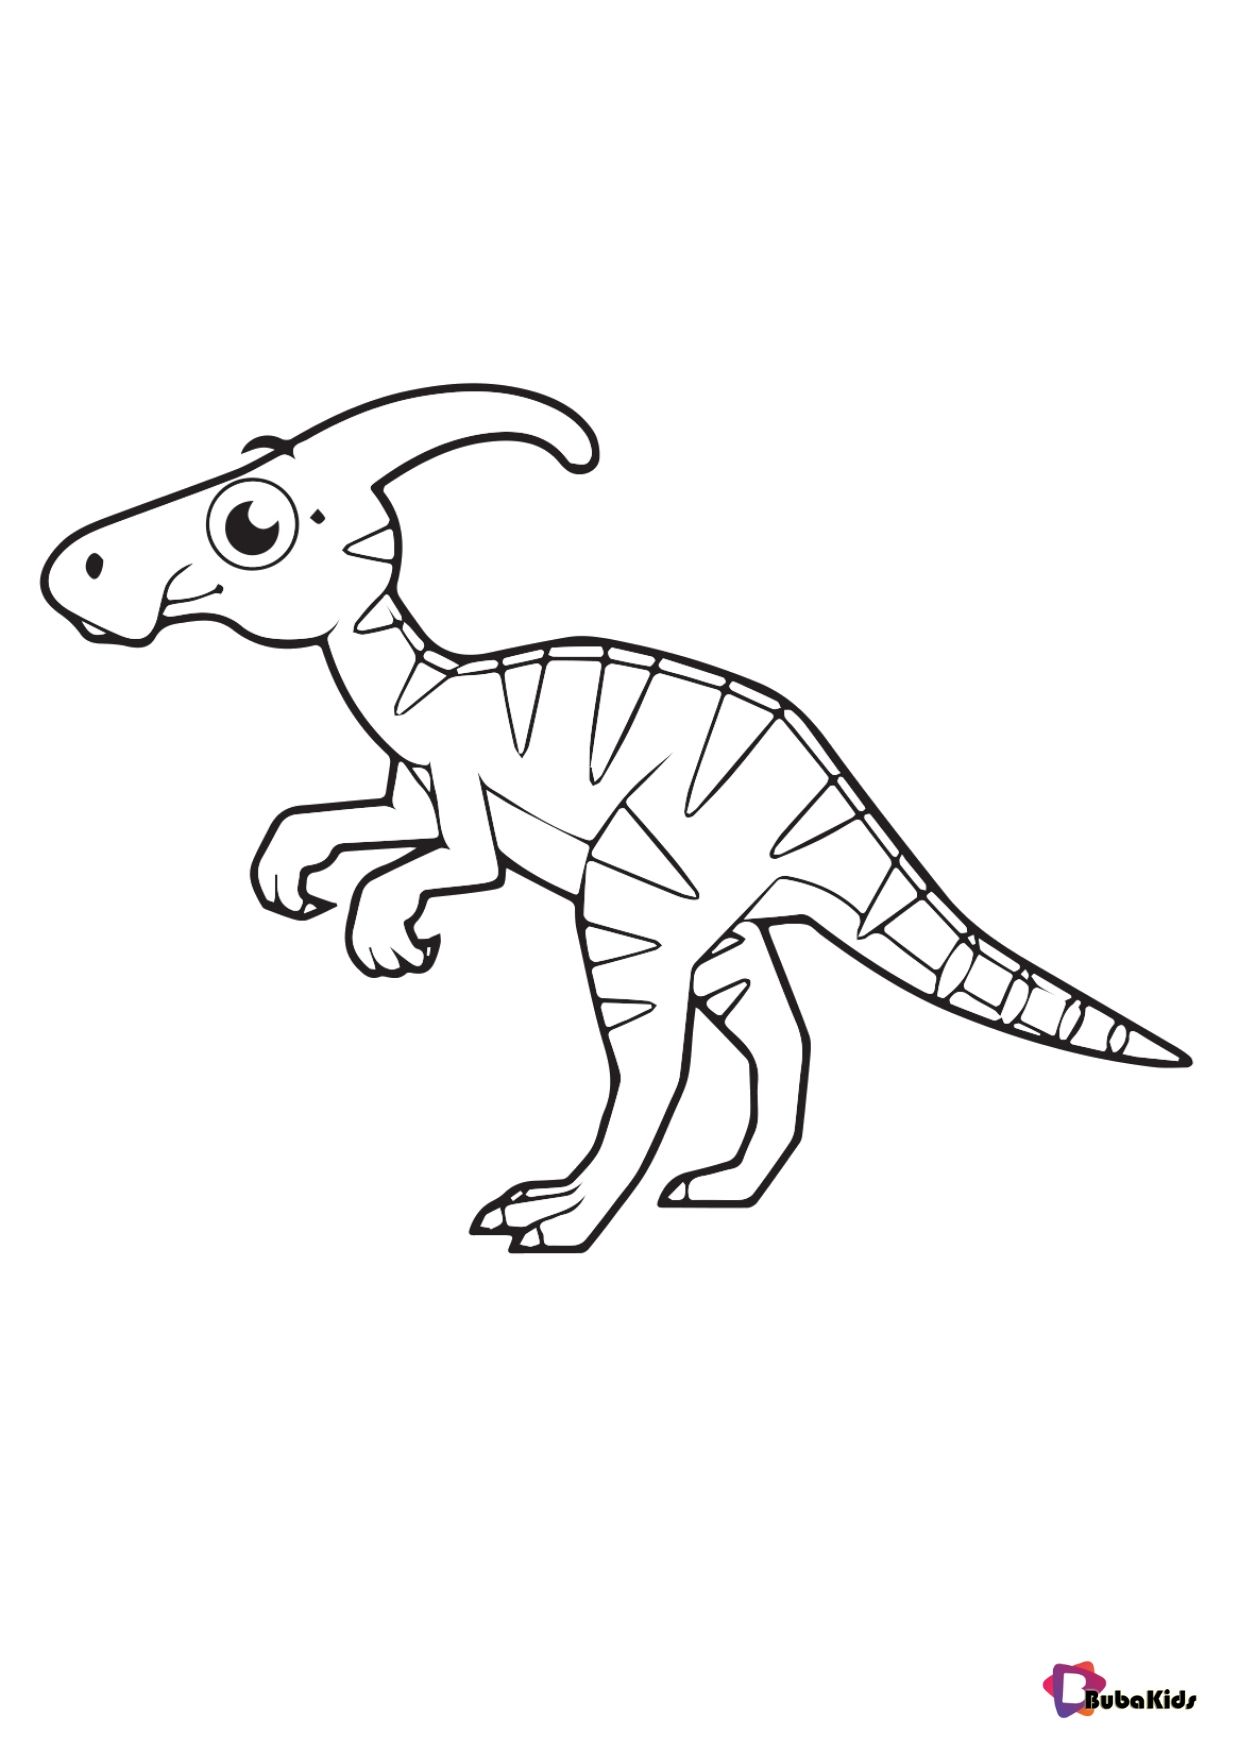 Free picture to download and print baby dinosaur coloring page | BubaKids.com